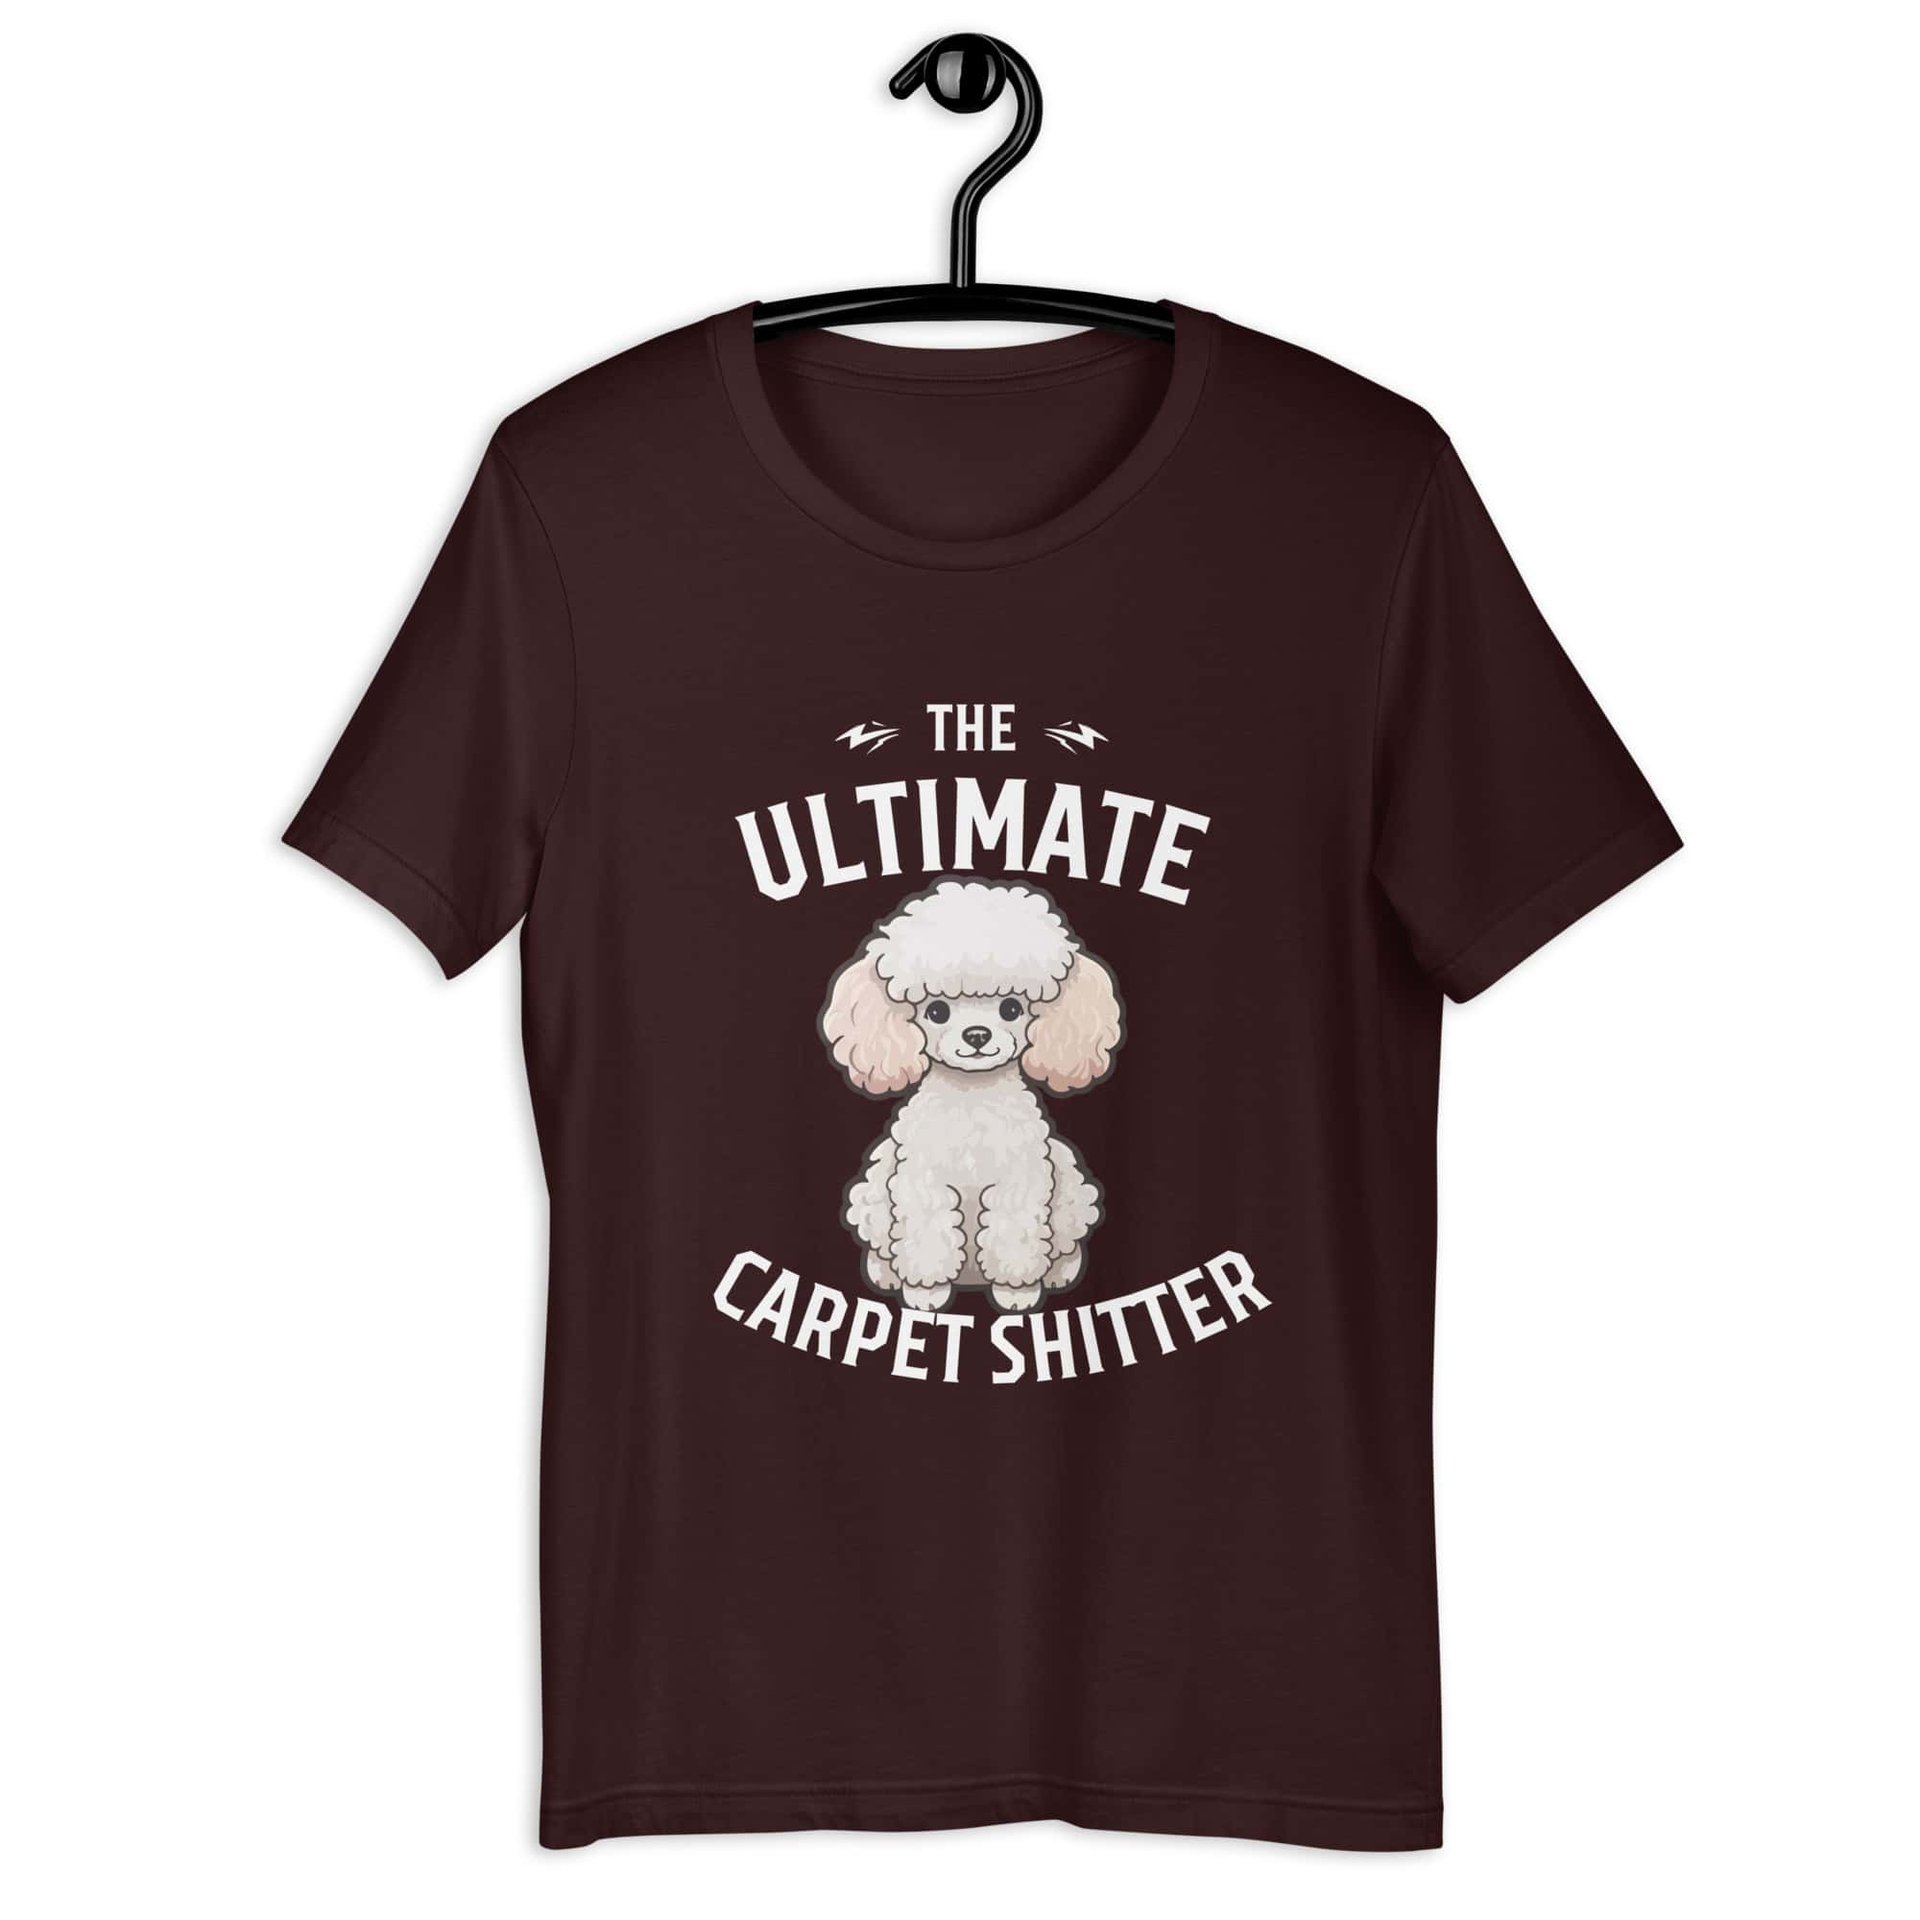 The Ultimate Carpet Shitter Funny Poodle Unisex T-Shirt brown